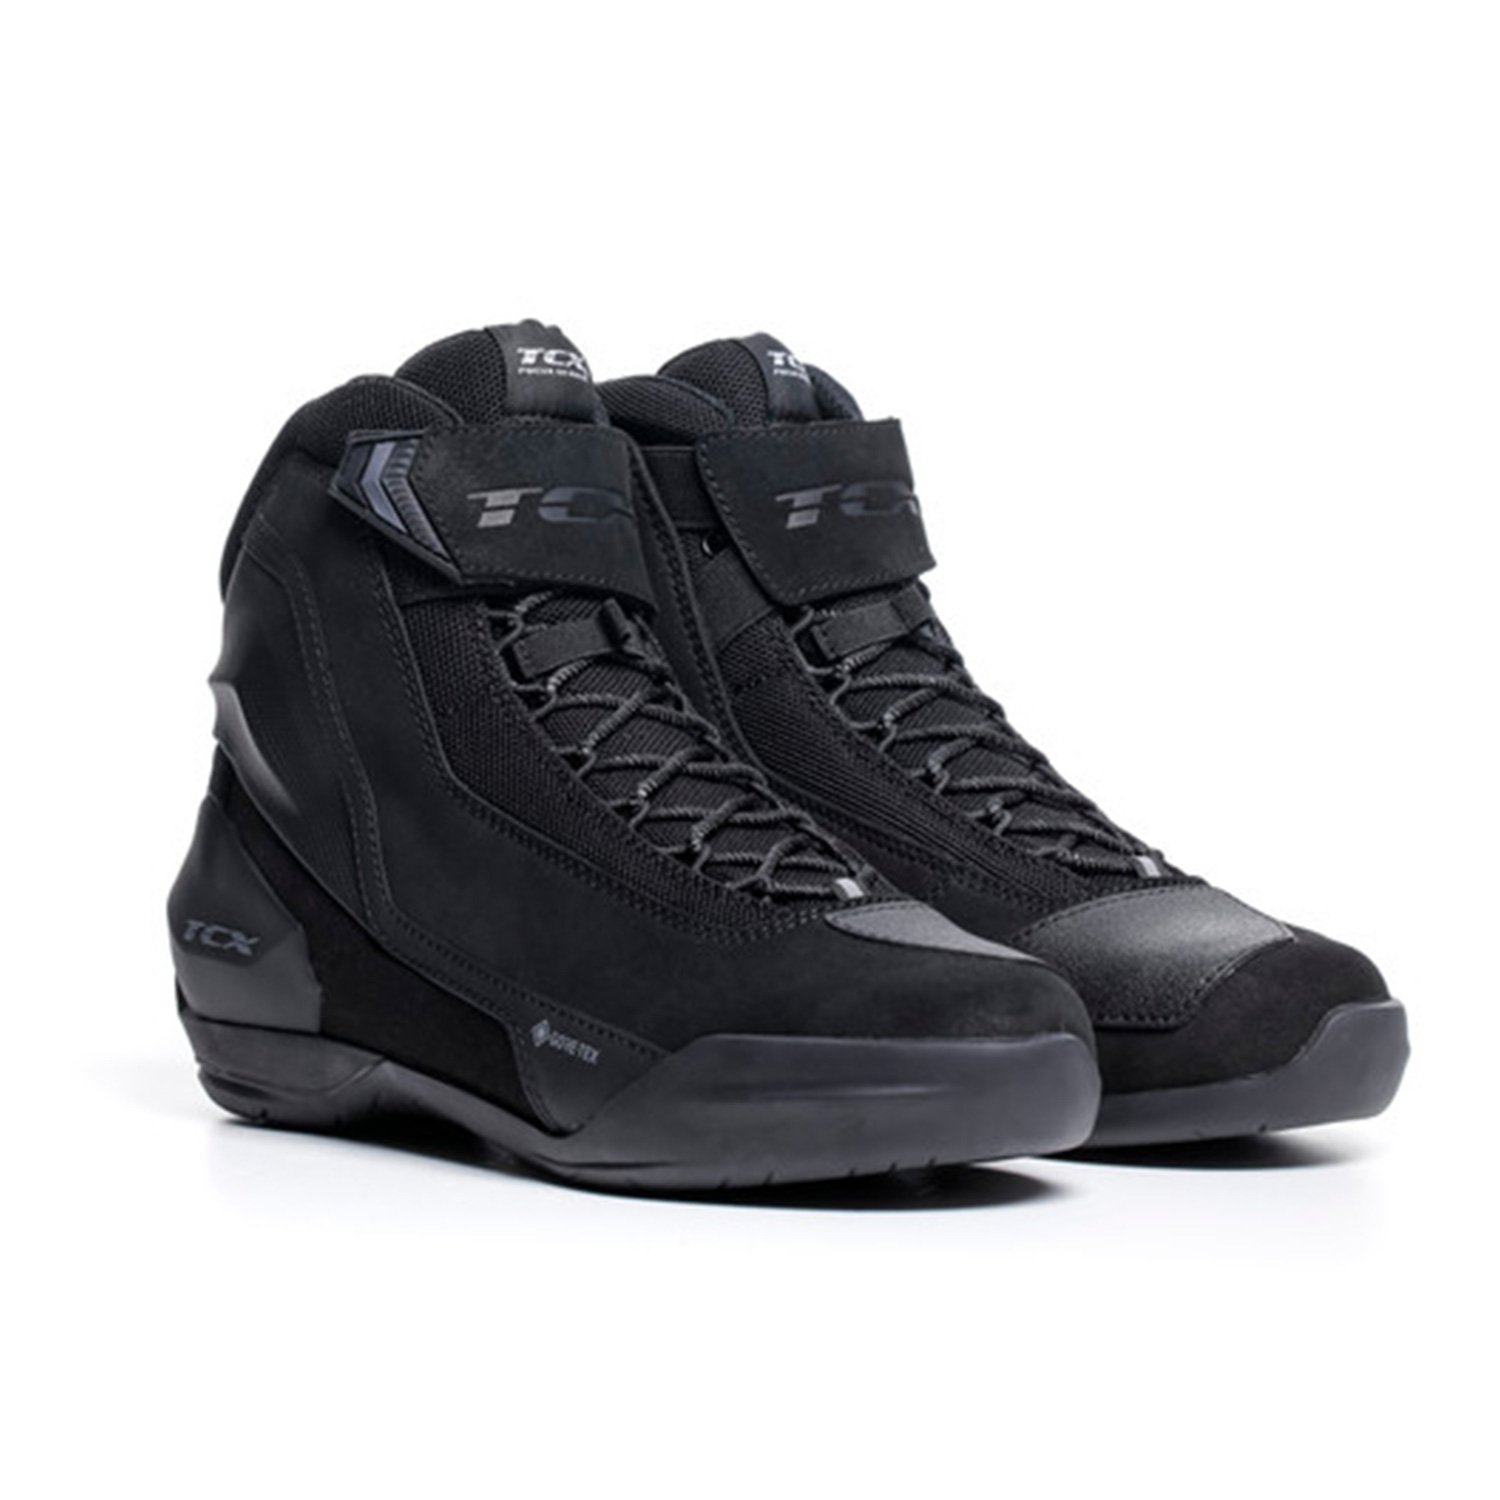 Image of TCX Jupiter 5 Gore-Tex Noir Chaussures Taille 42